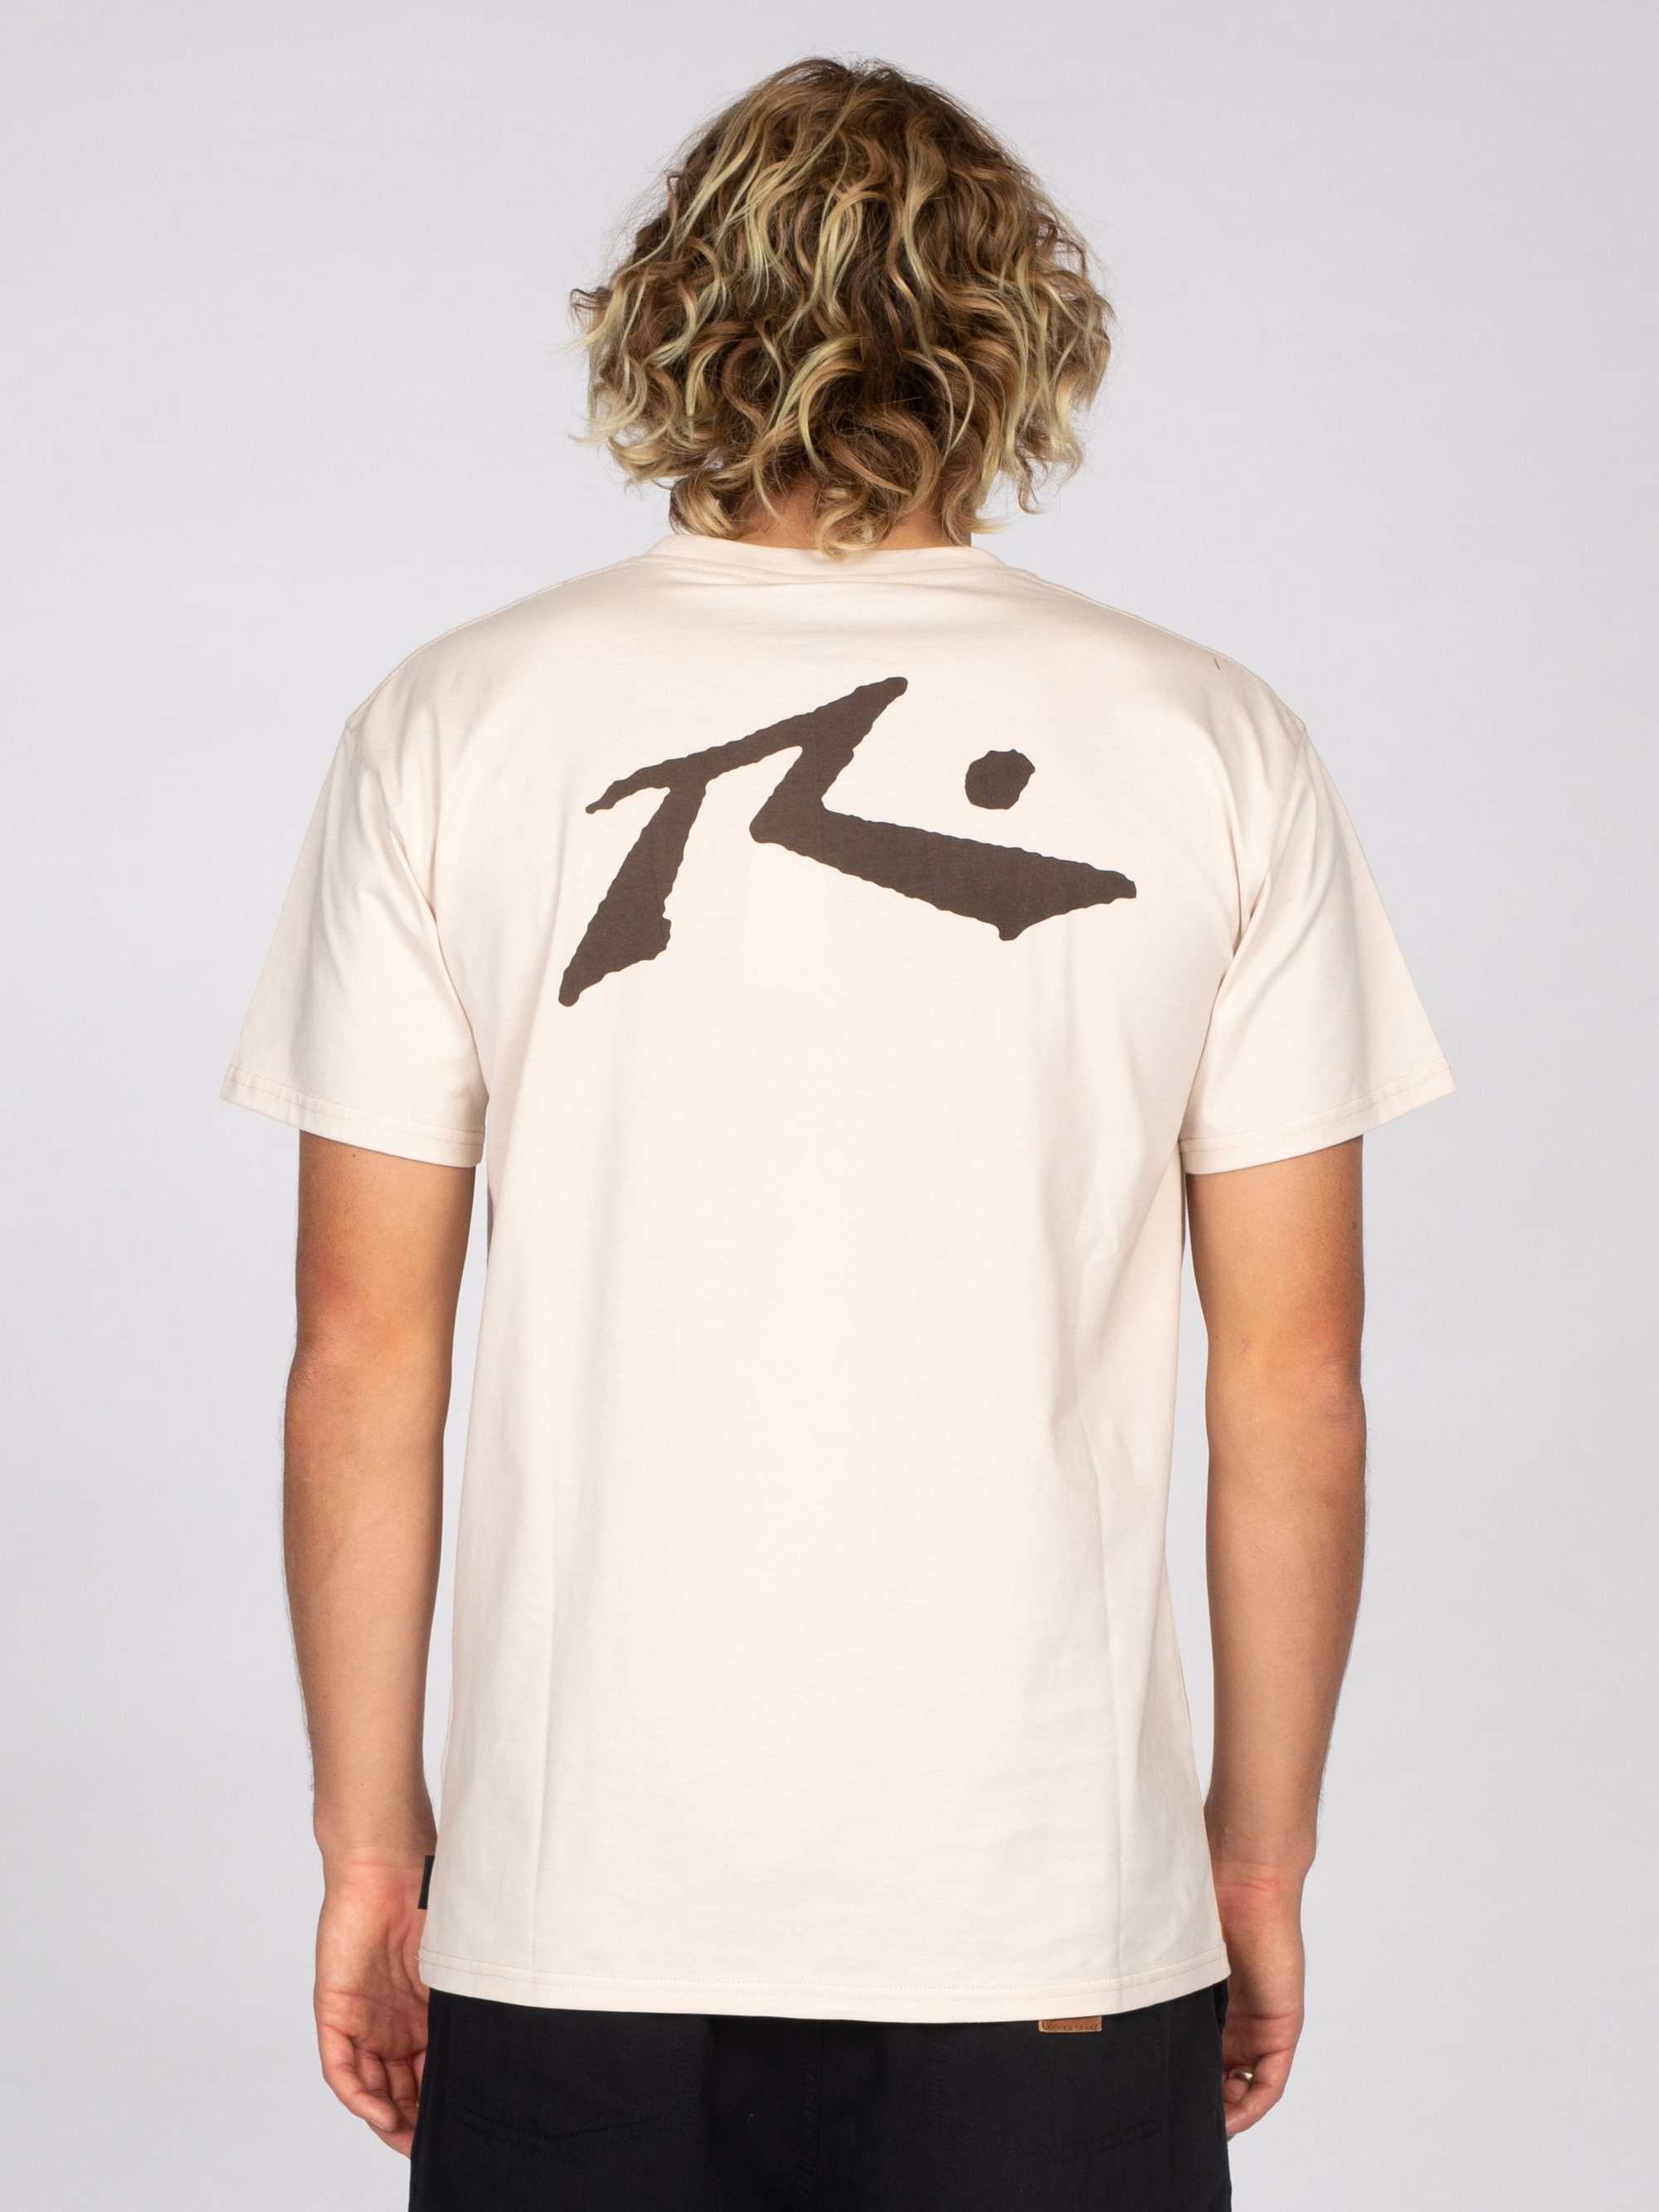 COMPETITION Stone T-Shirt SLEEVE Rusty TEE SHORT Pumice